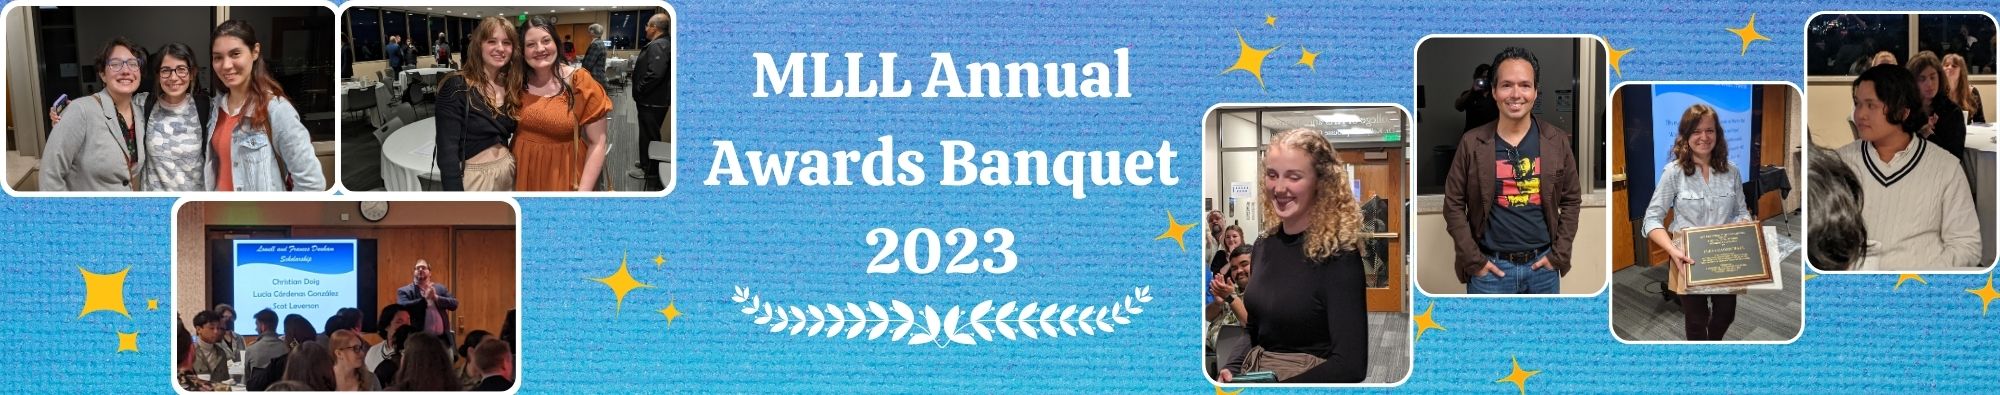 Banner showing pictures from MLLL Awards Banquet.